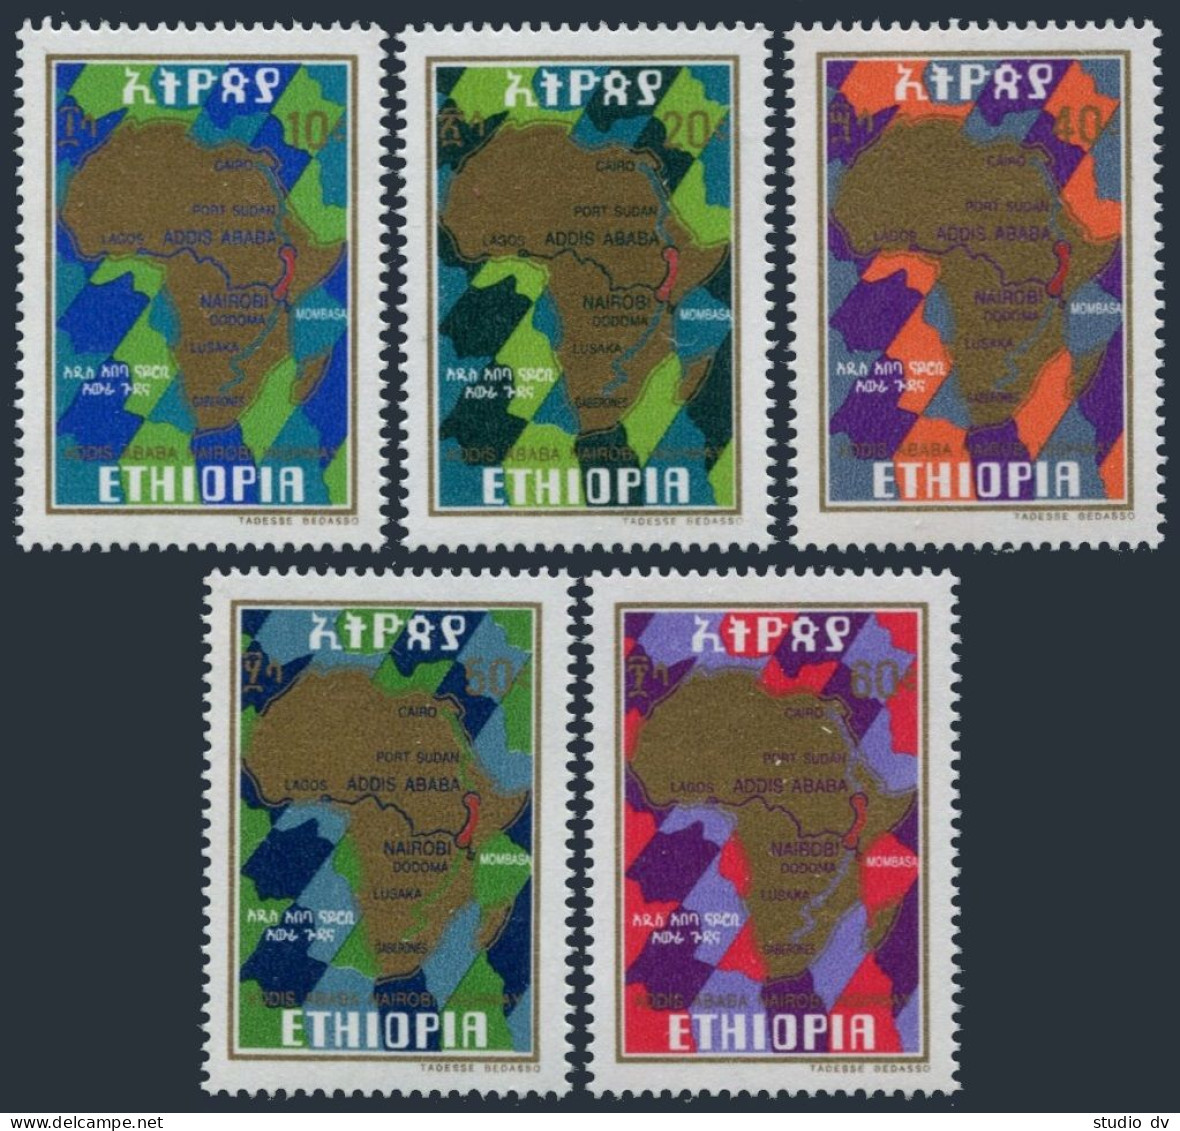 Ethiopia 827-831,MNH.Michel 913-917. Map Of Africa,Trans-East Highway,1977. - Ethiopia